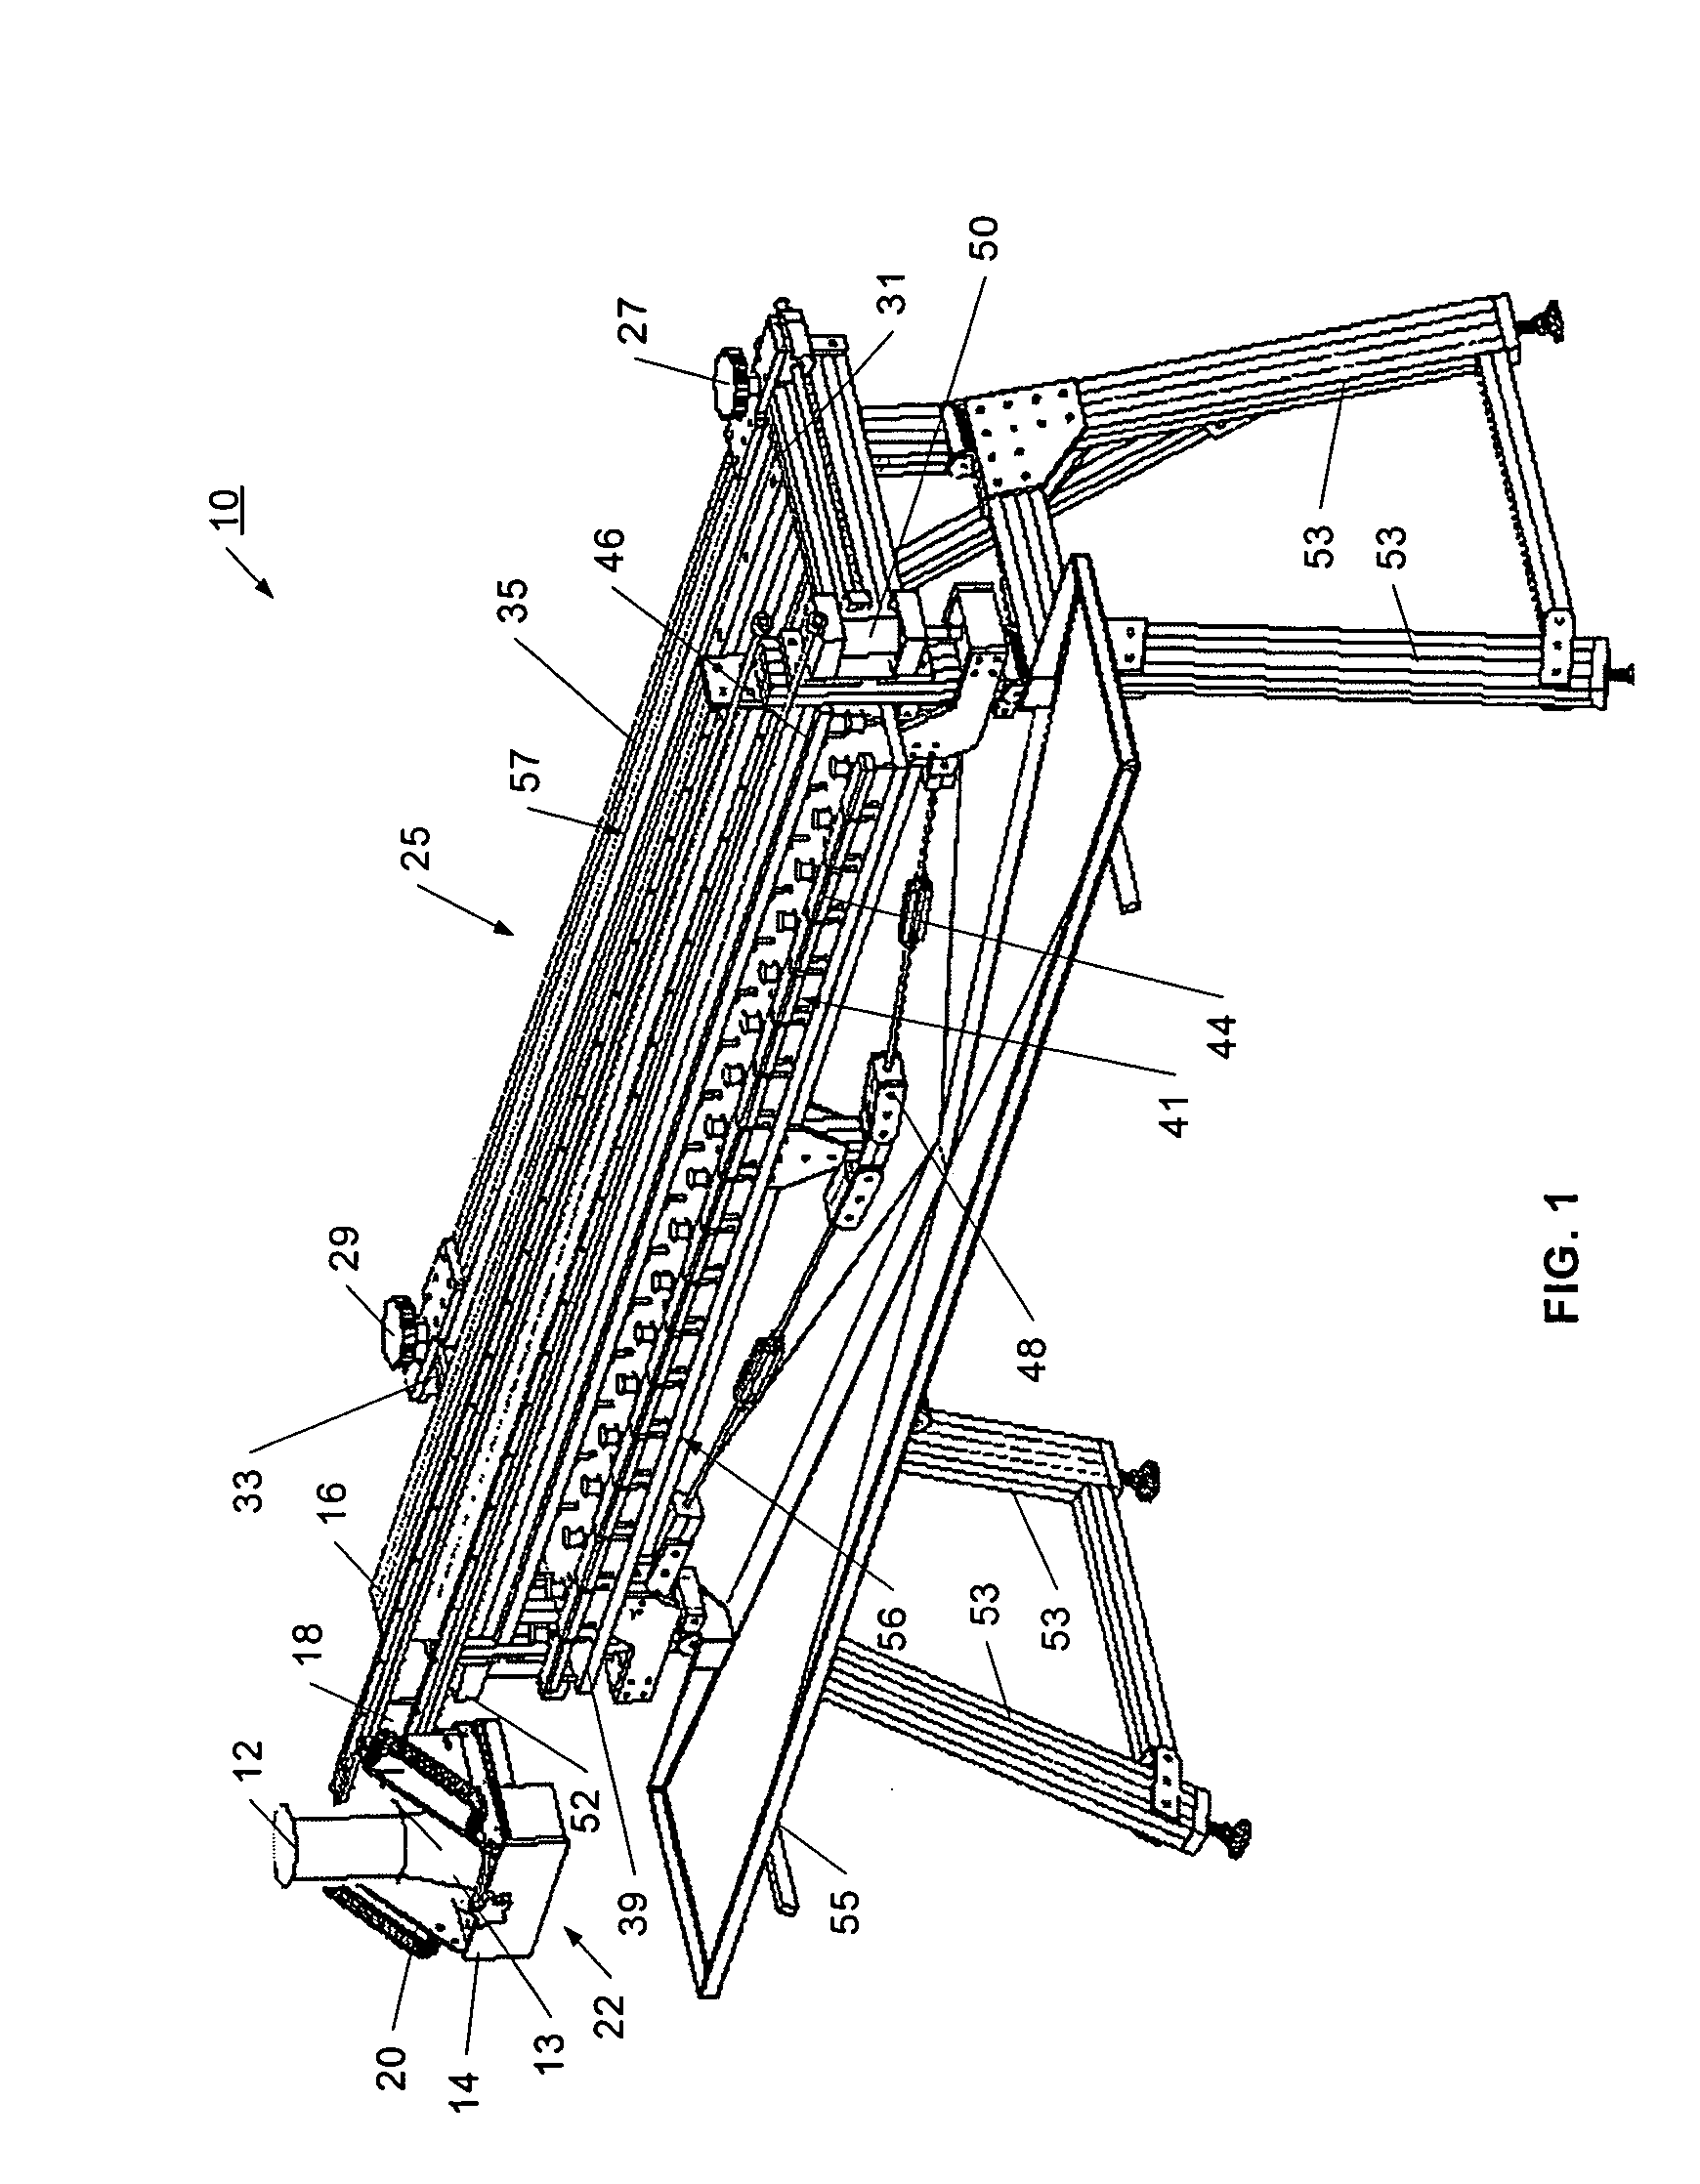 Apparatus and method for edging stone or stone tiles